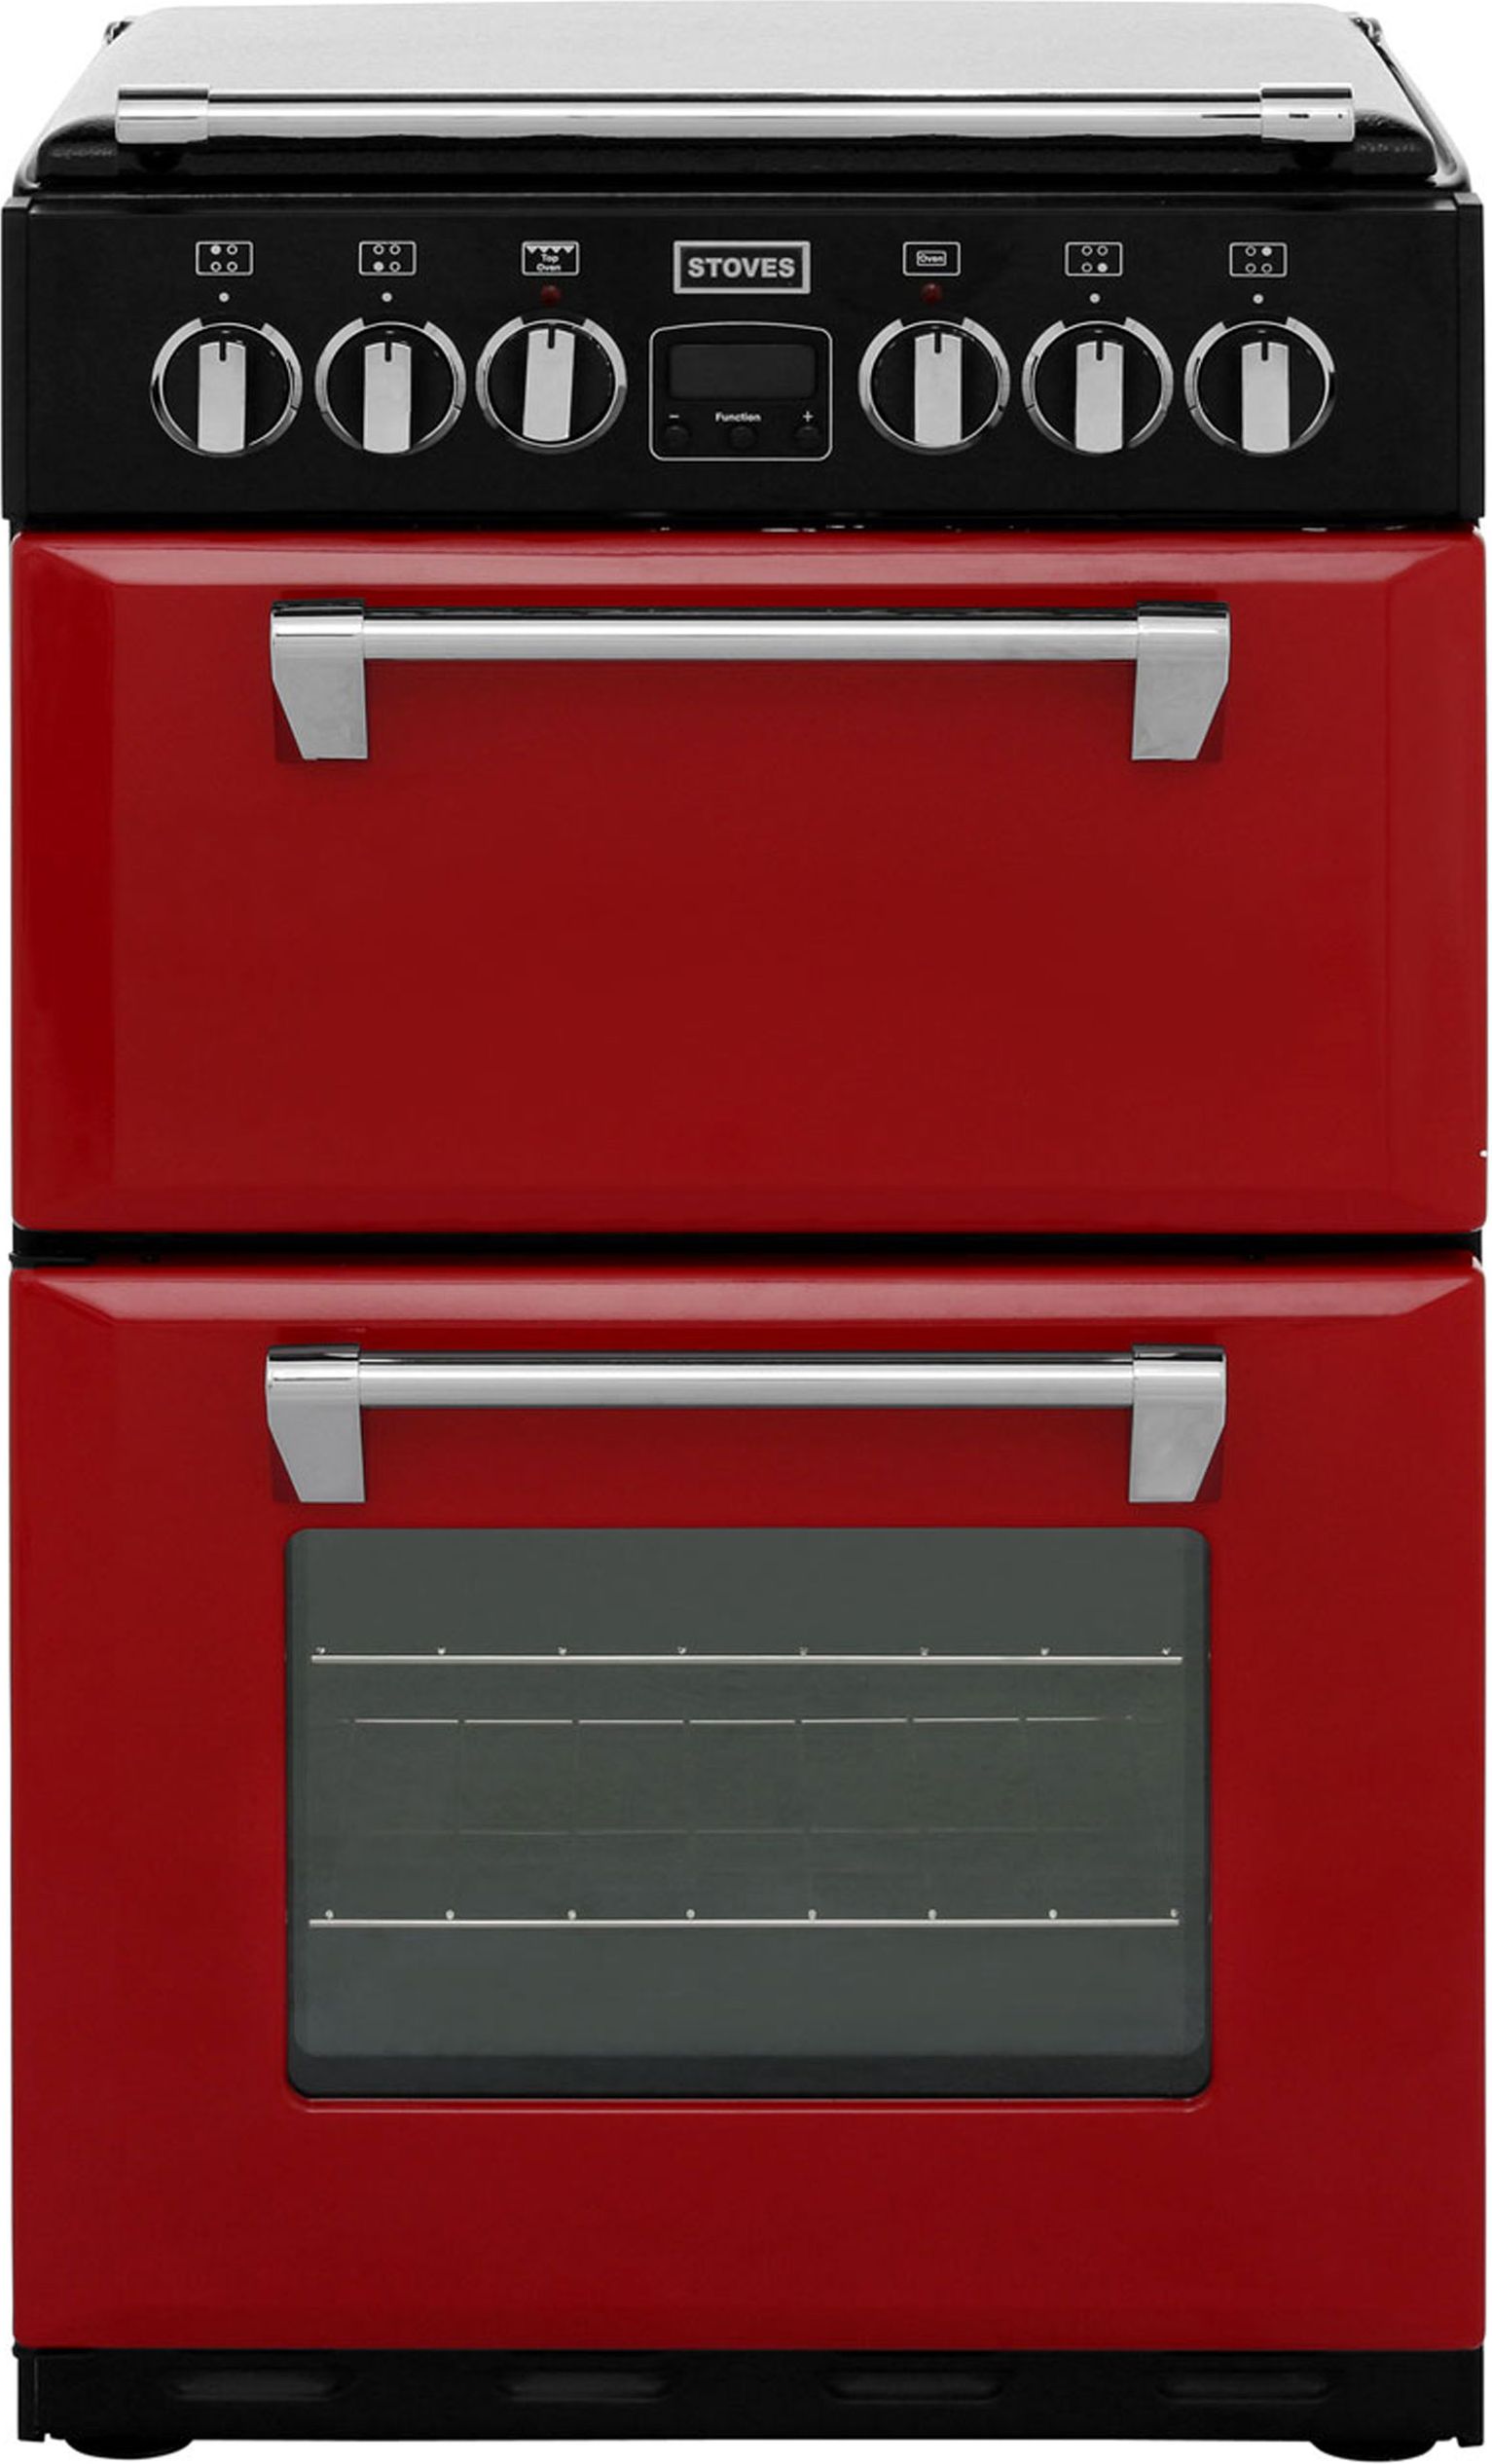 Stoves Mini Range RICHMOND550E 55cm Electric Cooker with Ceramic Hob - Jalapeno - A/A Rated, Red